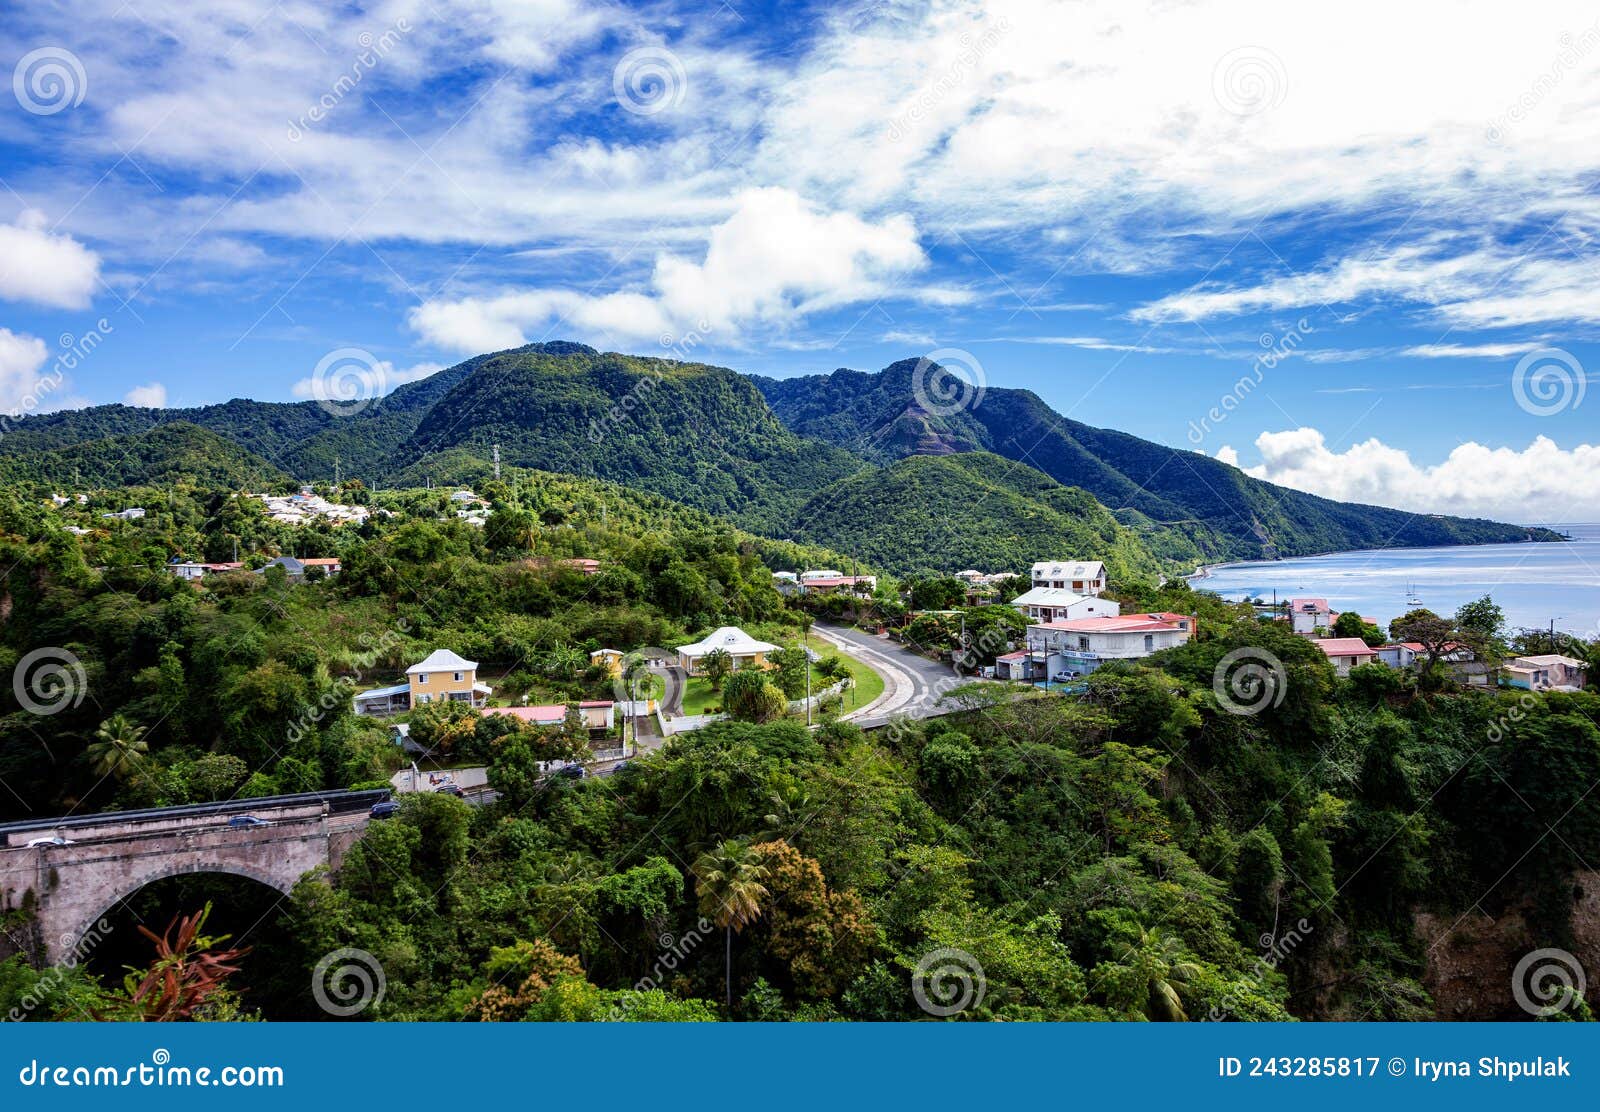 view over the south coast, basse-terre, guadeloupe, caribbean